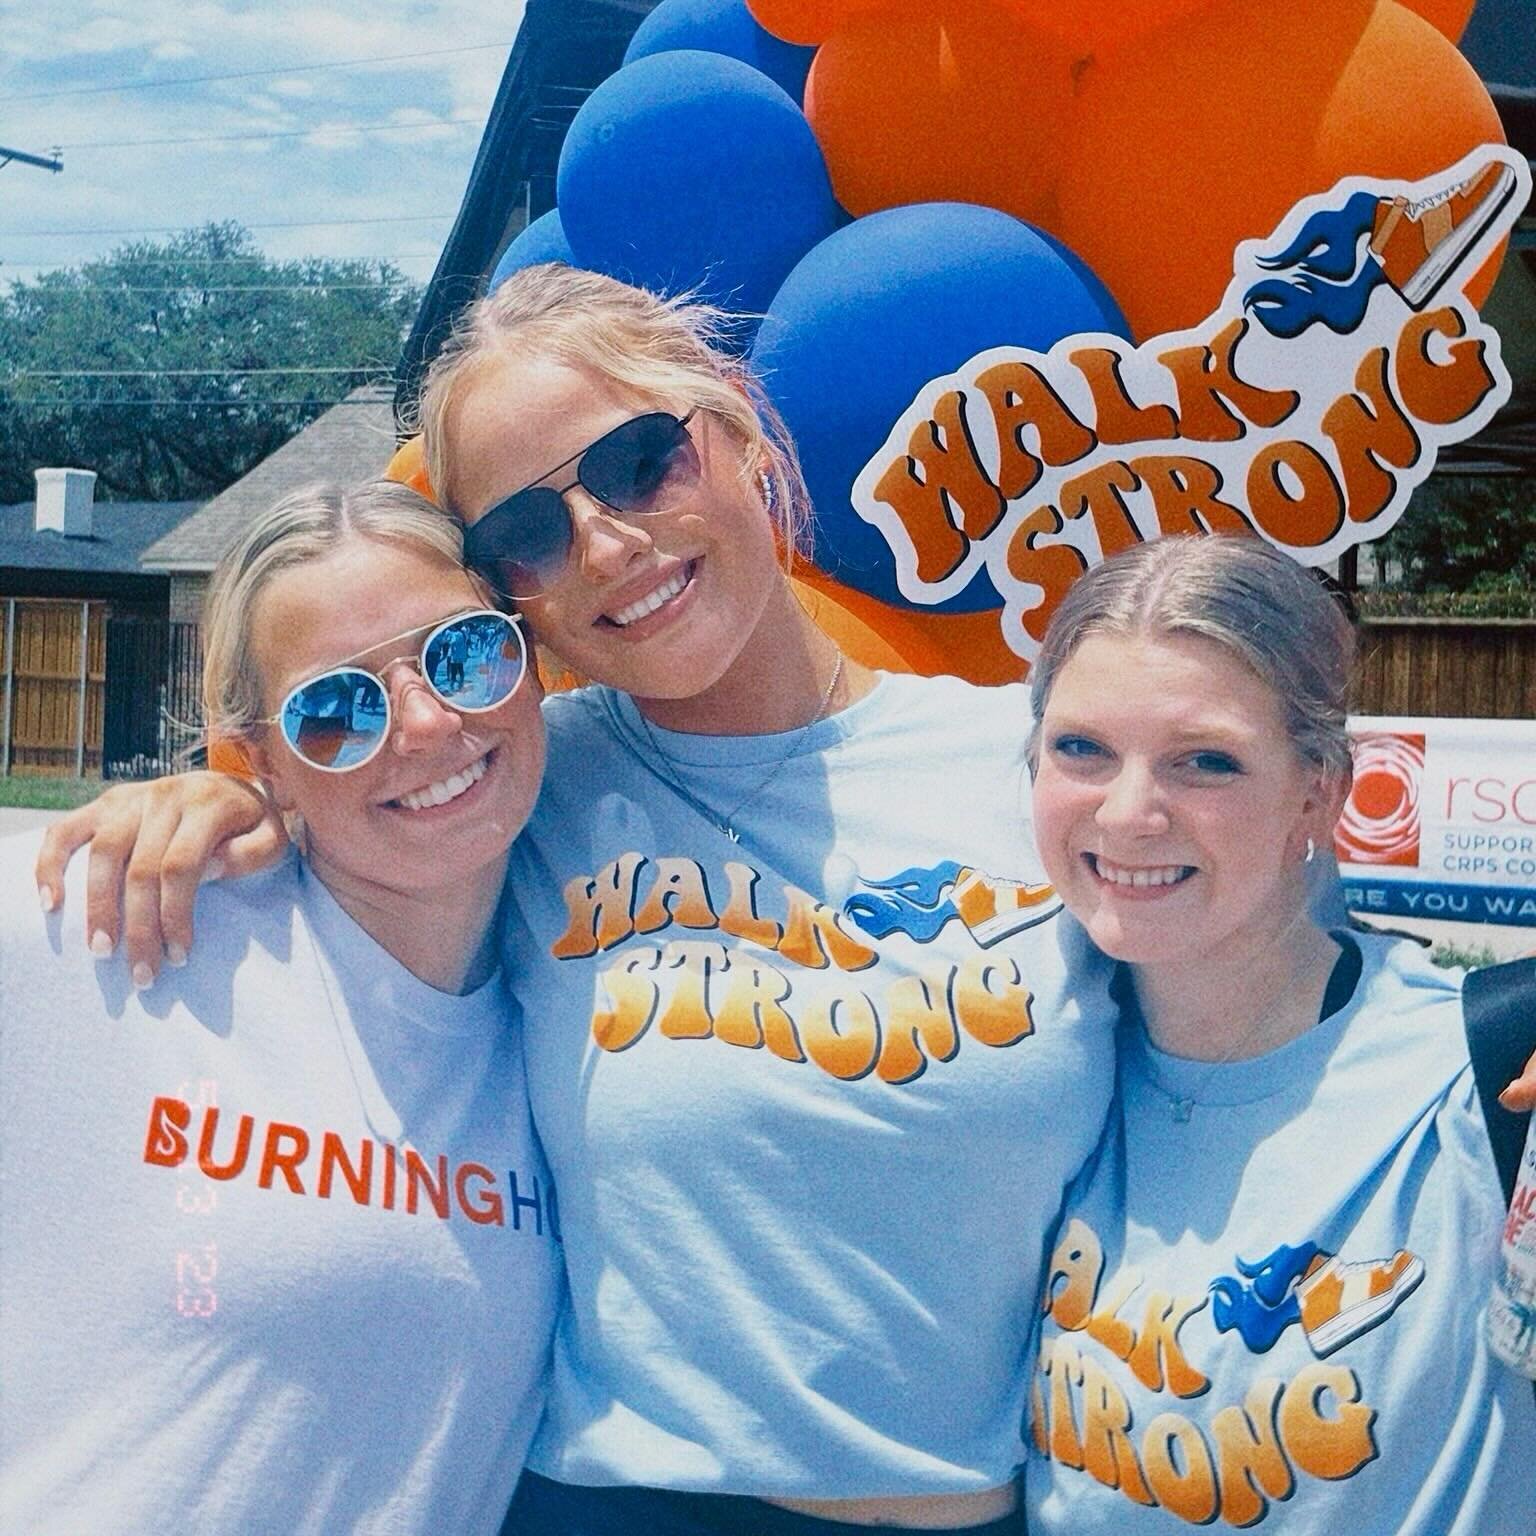 Can&rsquo;t make it to Walk Strong in Dallas? Walk Strong can come to you! Register your team as On-Location and walk the 3k in your hometown! Be sure to tag your teams with #WalkStrong4CRPS! 🧡